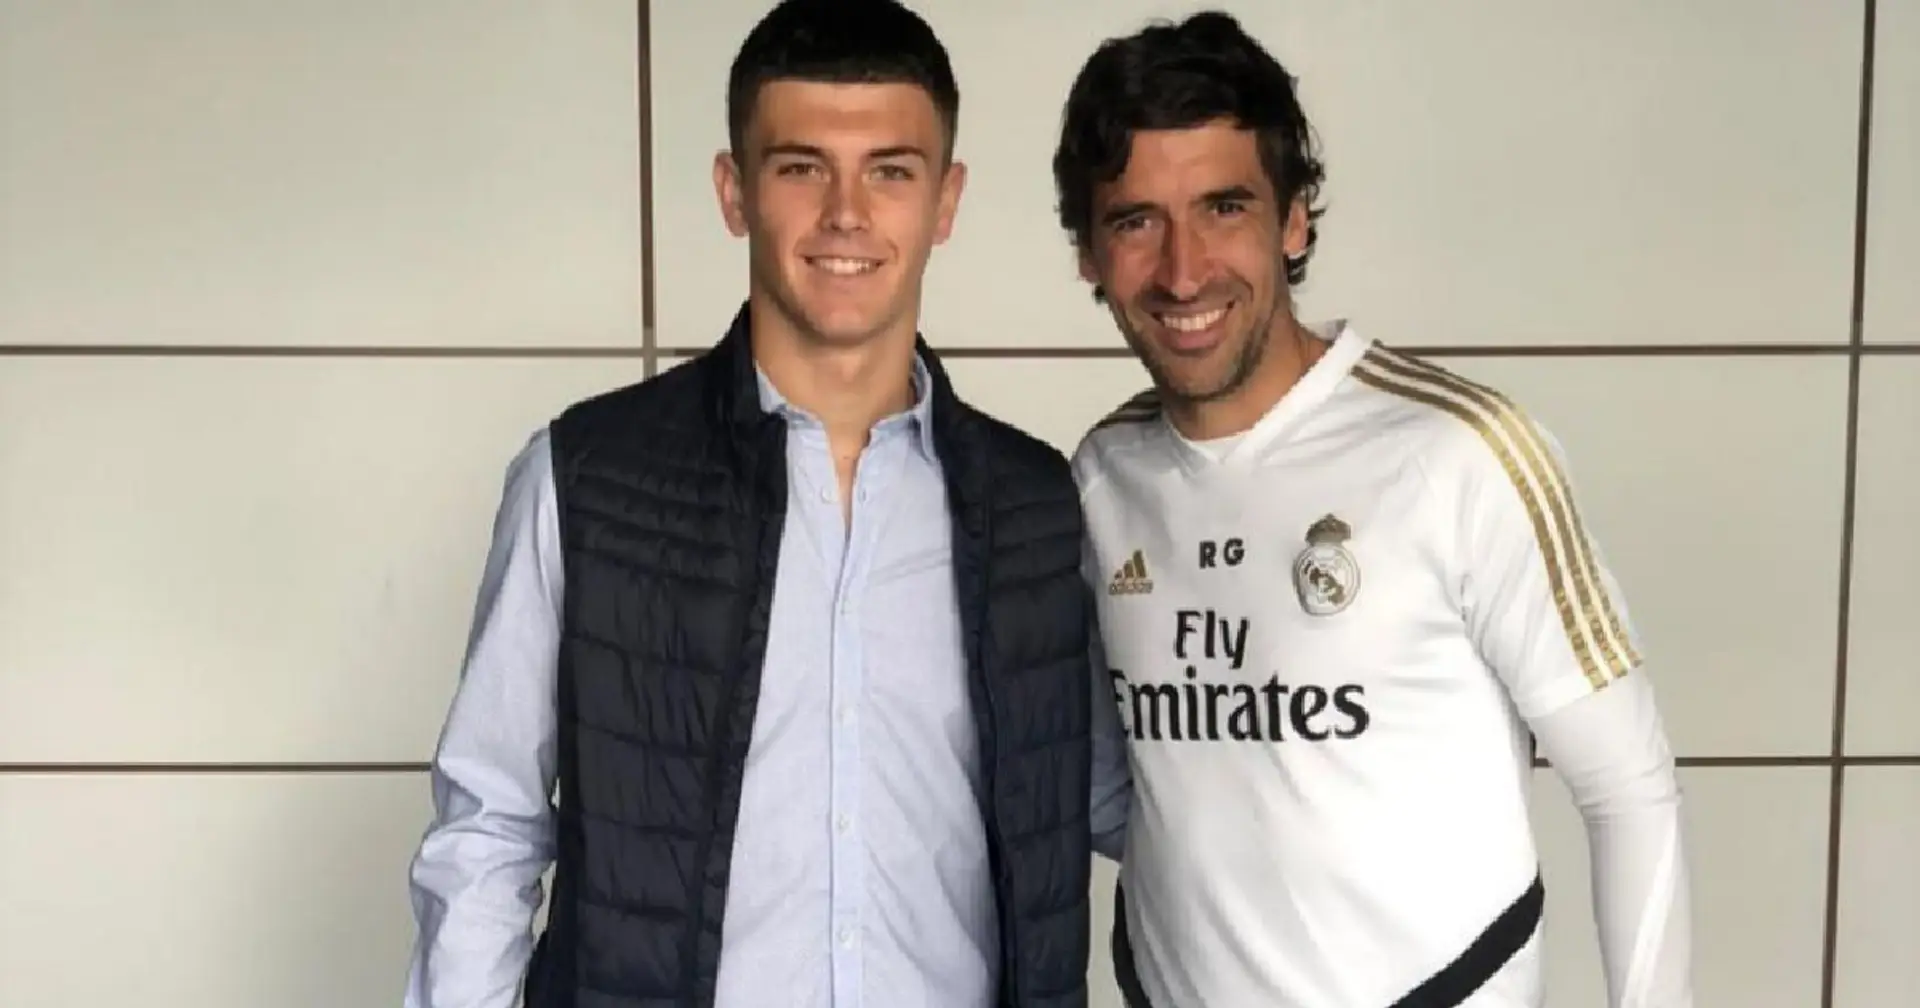 Real Madrid sign 17-year-old Juanma Hernandez - Here are 6 key things you need to know